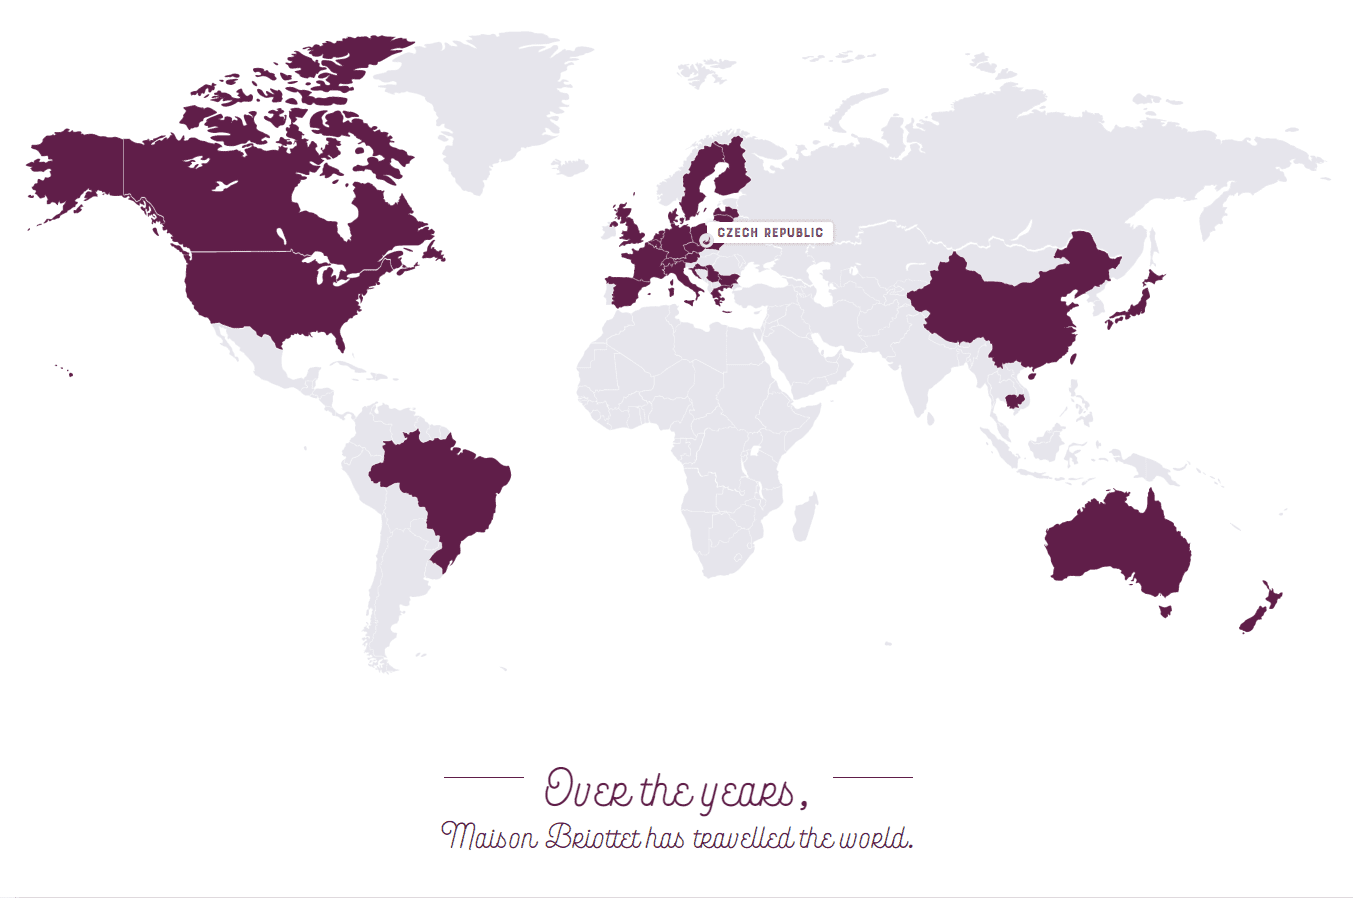 Briottet in 30 countries